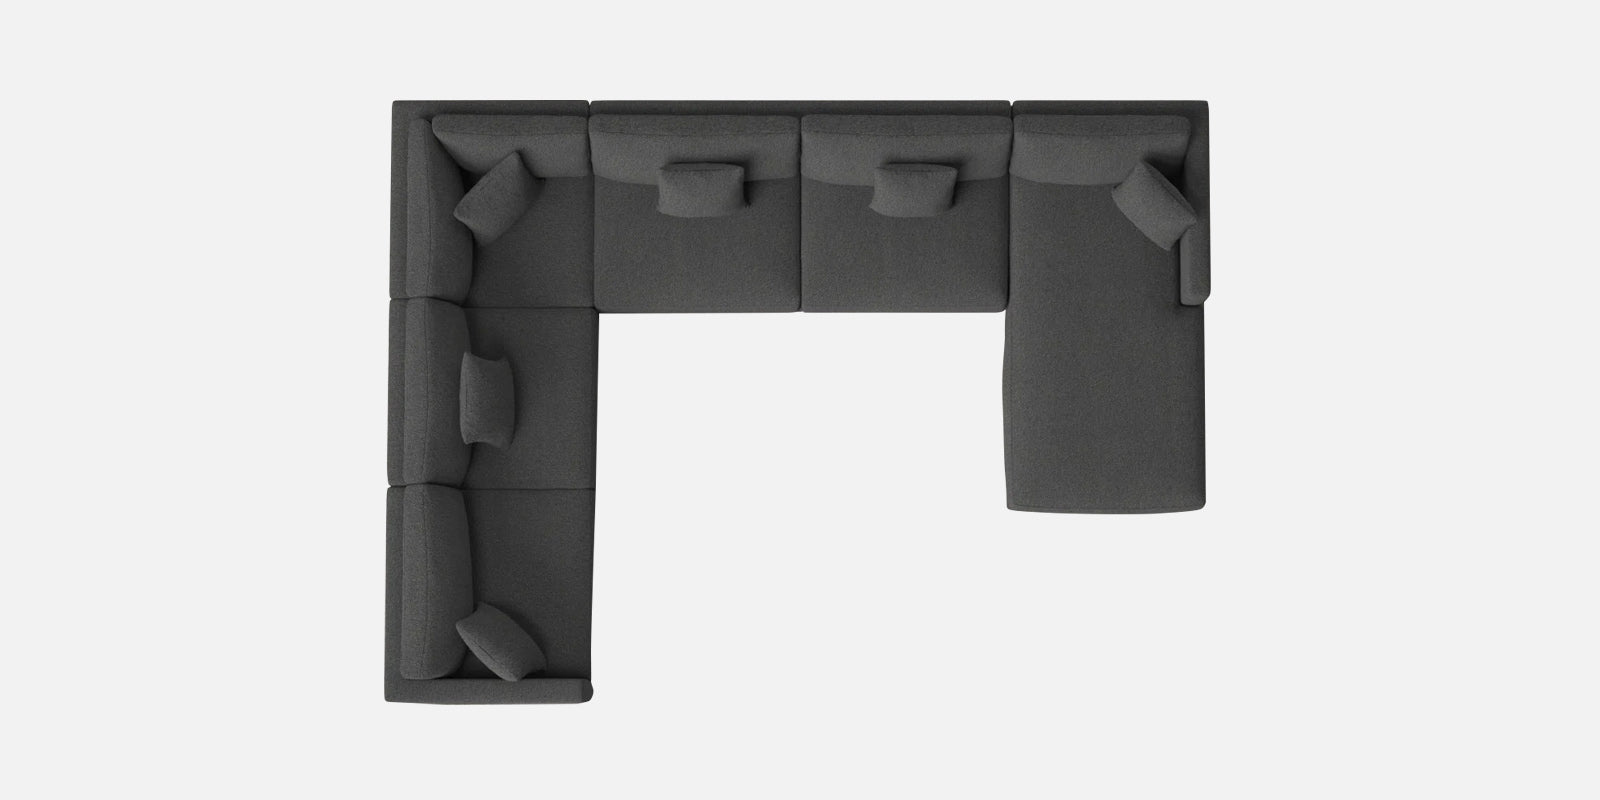 Carlin Fabric LHS 8 Seater Sectional Sofa In Charcoal Grey Colour